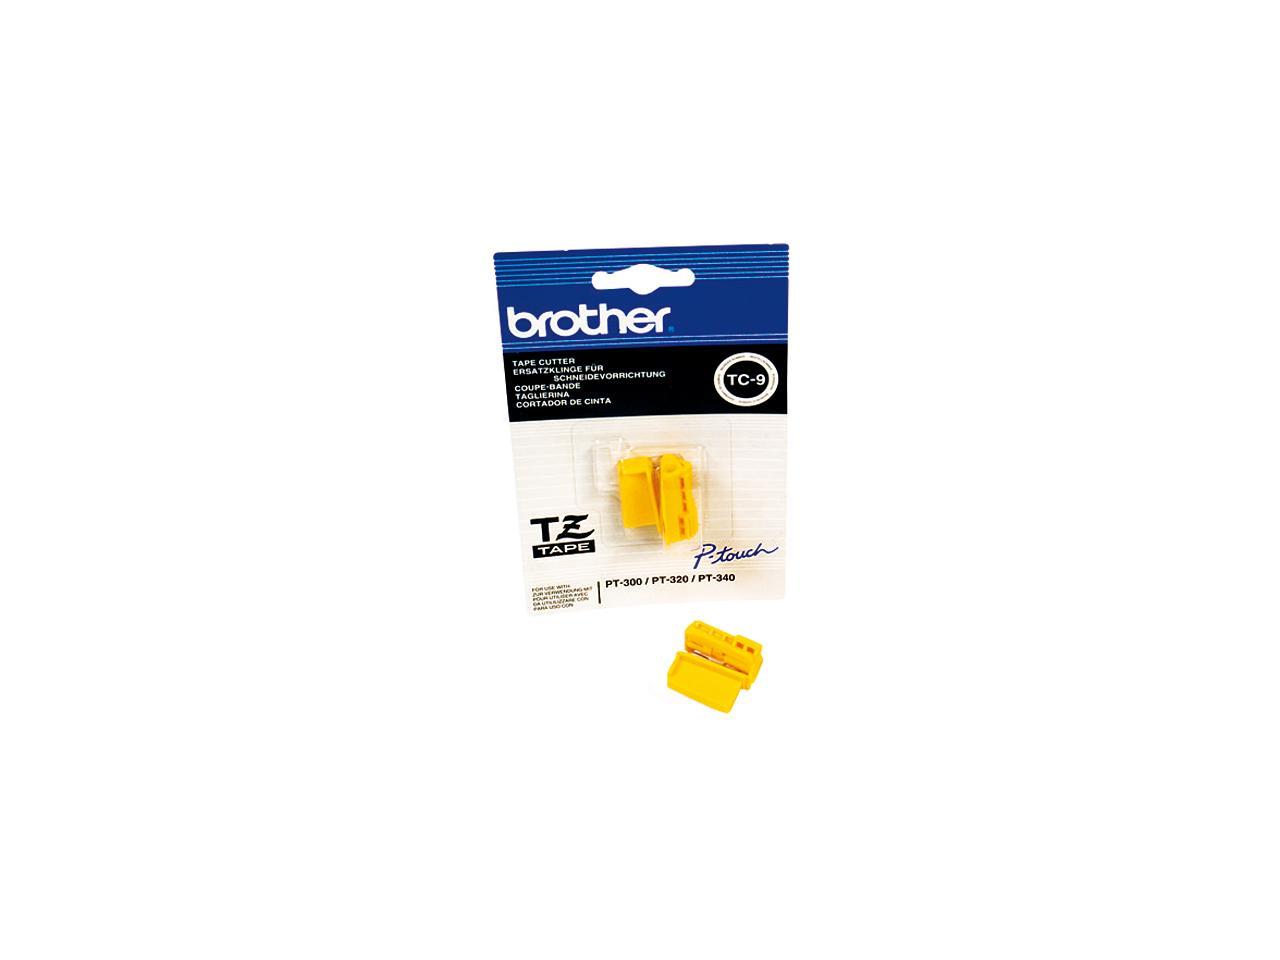 Brother TC9 Replacement Tape Cutter Unit For P-touch 300, 310, 320, 340 Printers